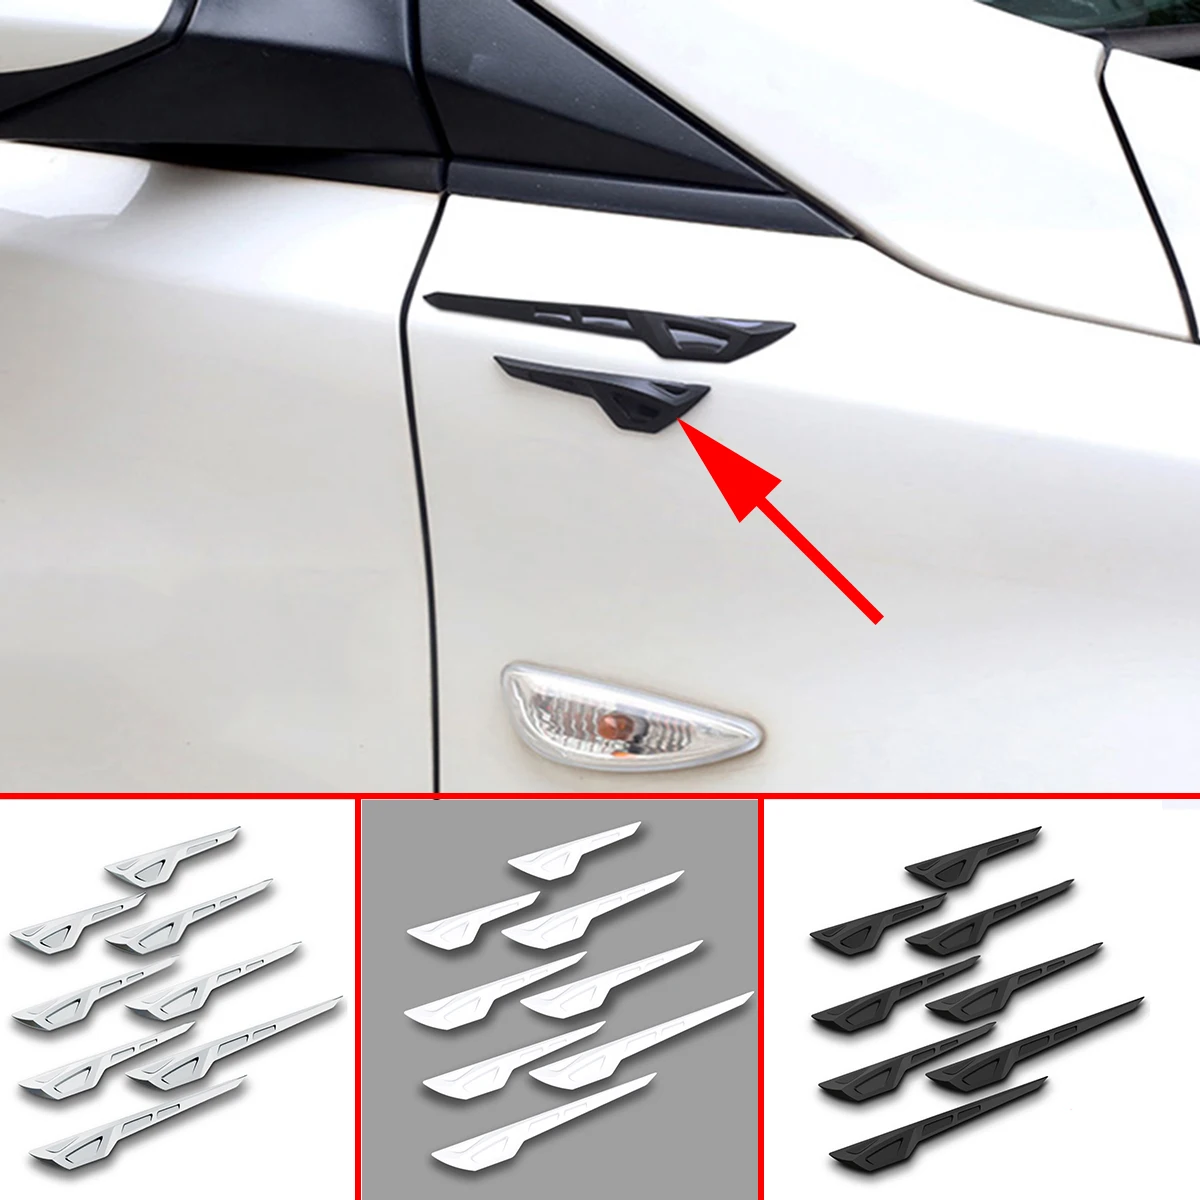 

8PCS Universal Car Edge Anti Collision Scratch Safety Guards Door Side Body Corner Sticker Rubber Protector Stripes